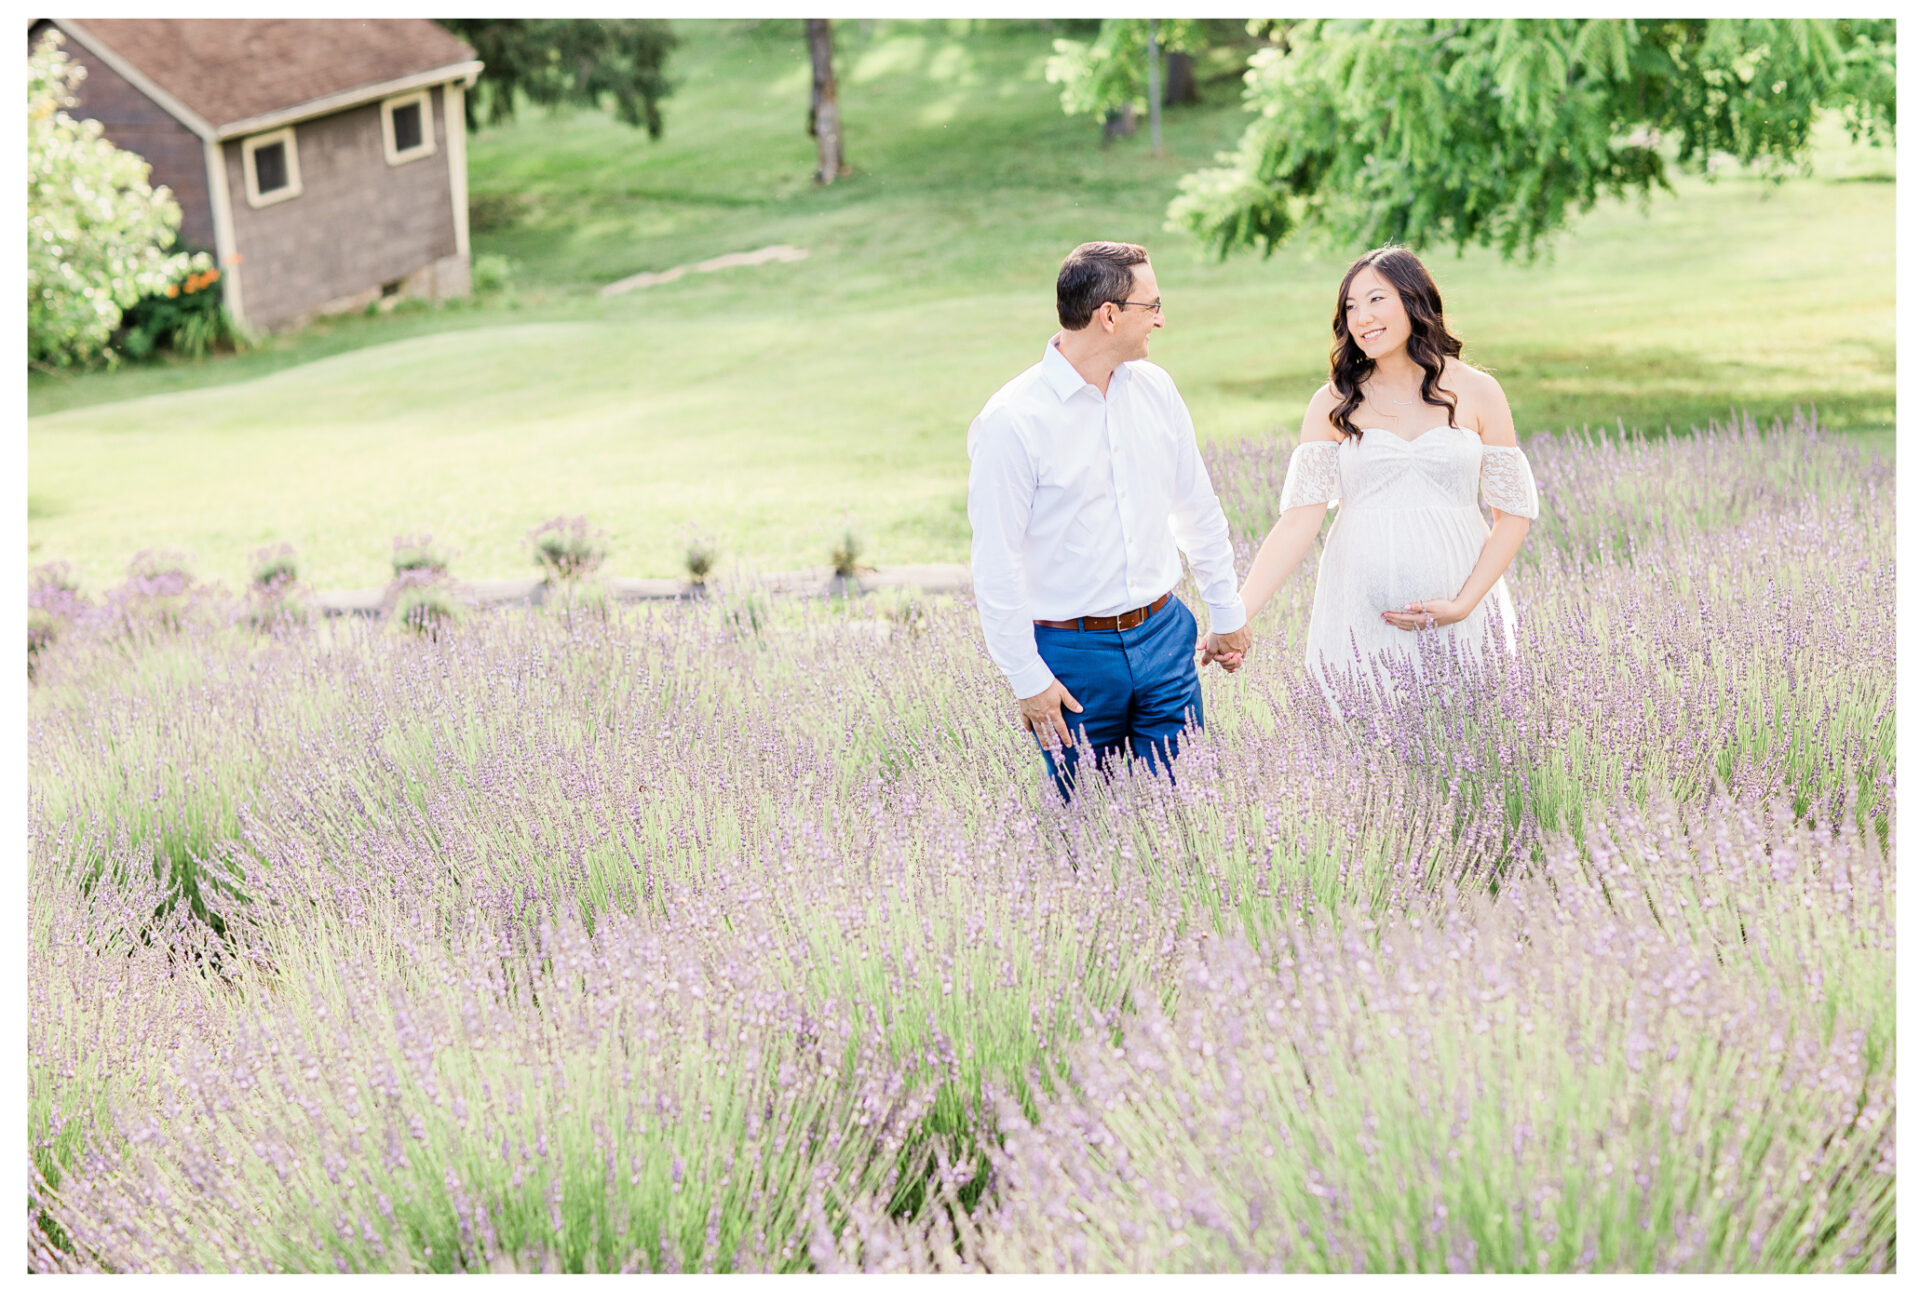 Dayton Maternity Photography | Winter Freire Photography | Dayton, Ohio Photographer | Organic Maternity Spring Session Centerville, OH | Timeless Organic Maternity Portraits | Lavender Field Photography Ohio | Dreamy Lavender Field Maternity Session